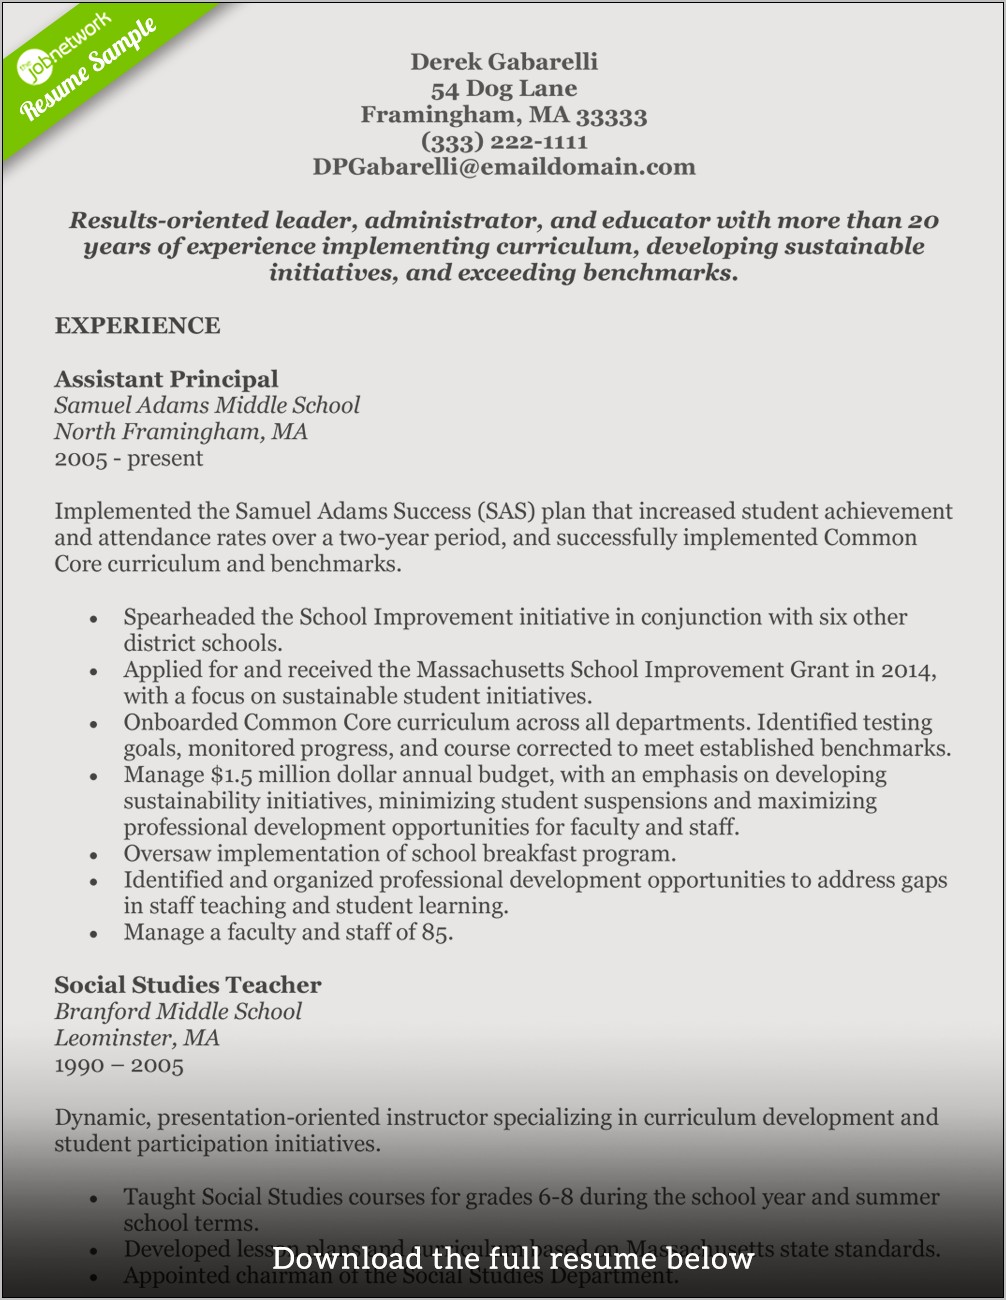 Resume For A Middle School Student